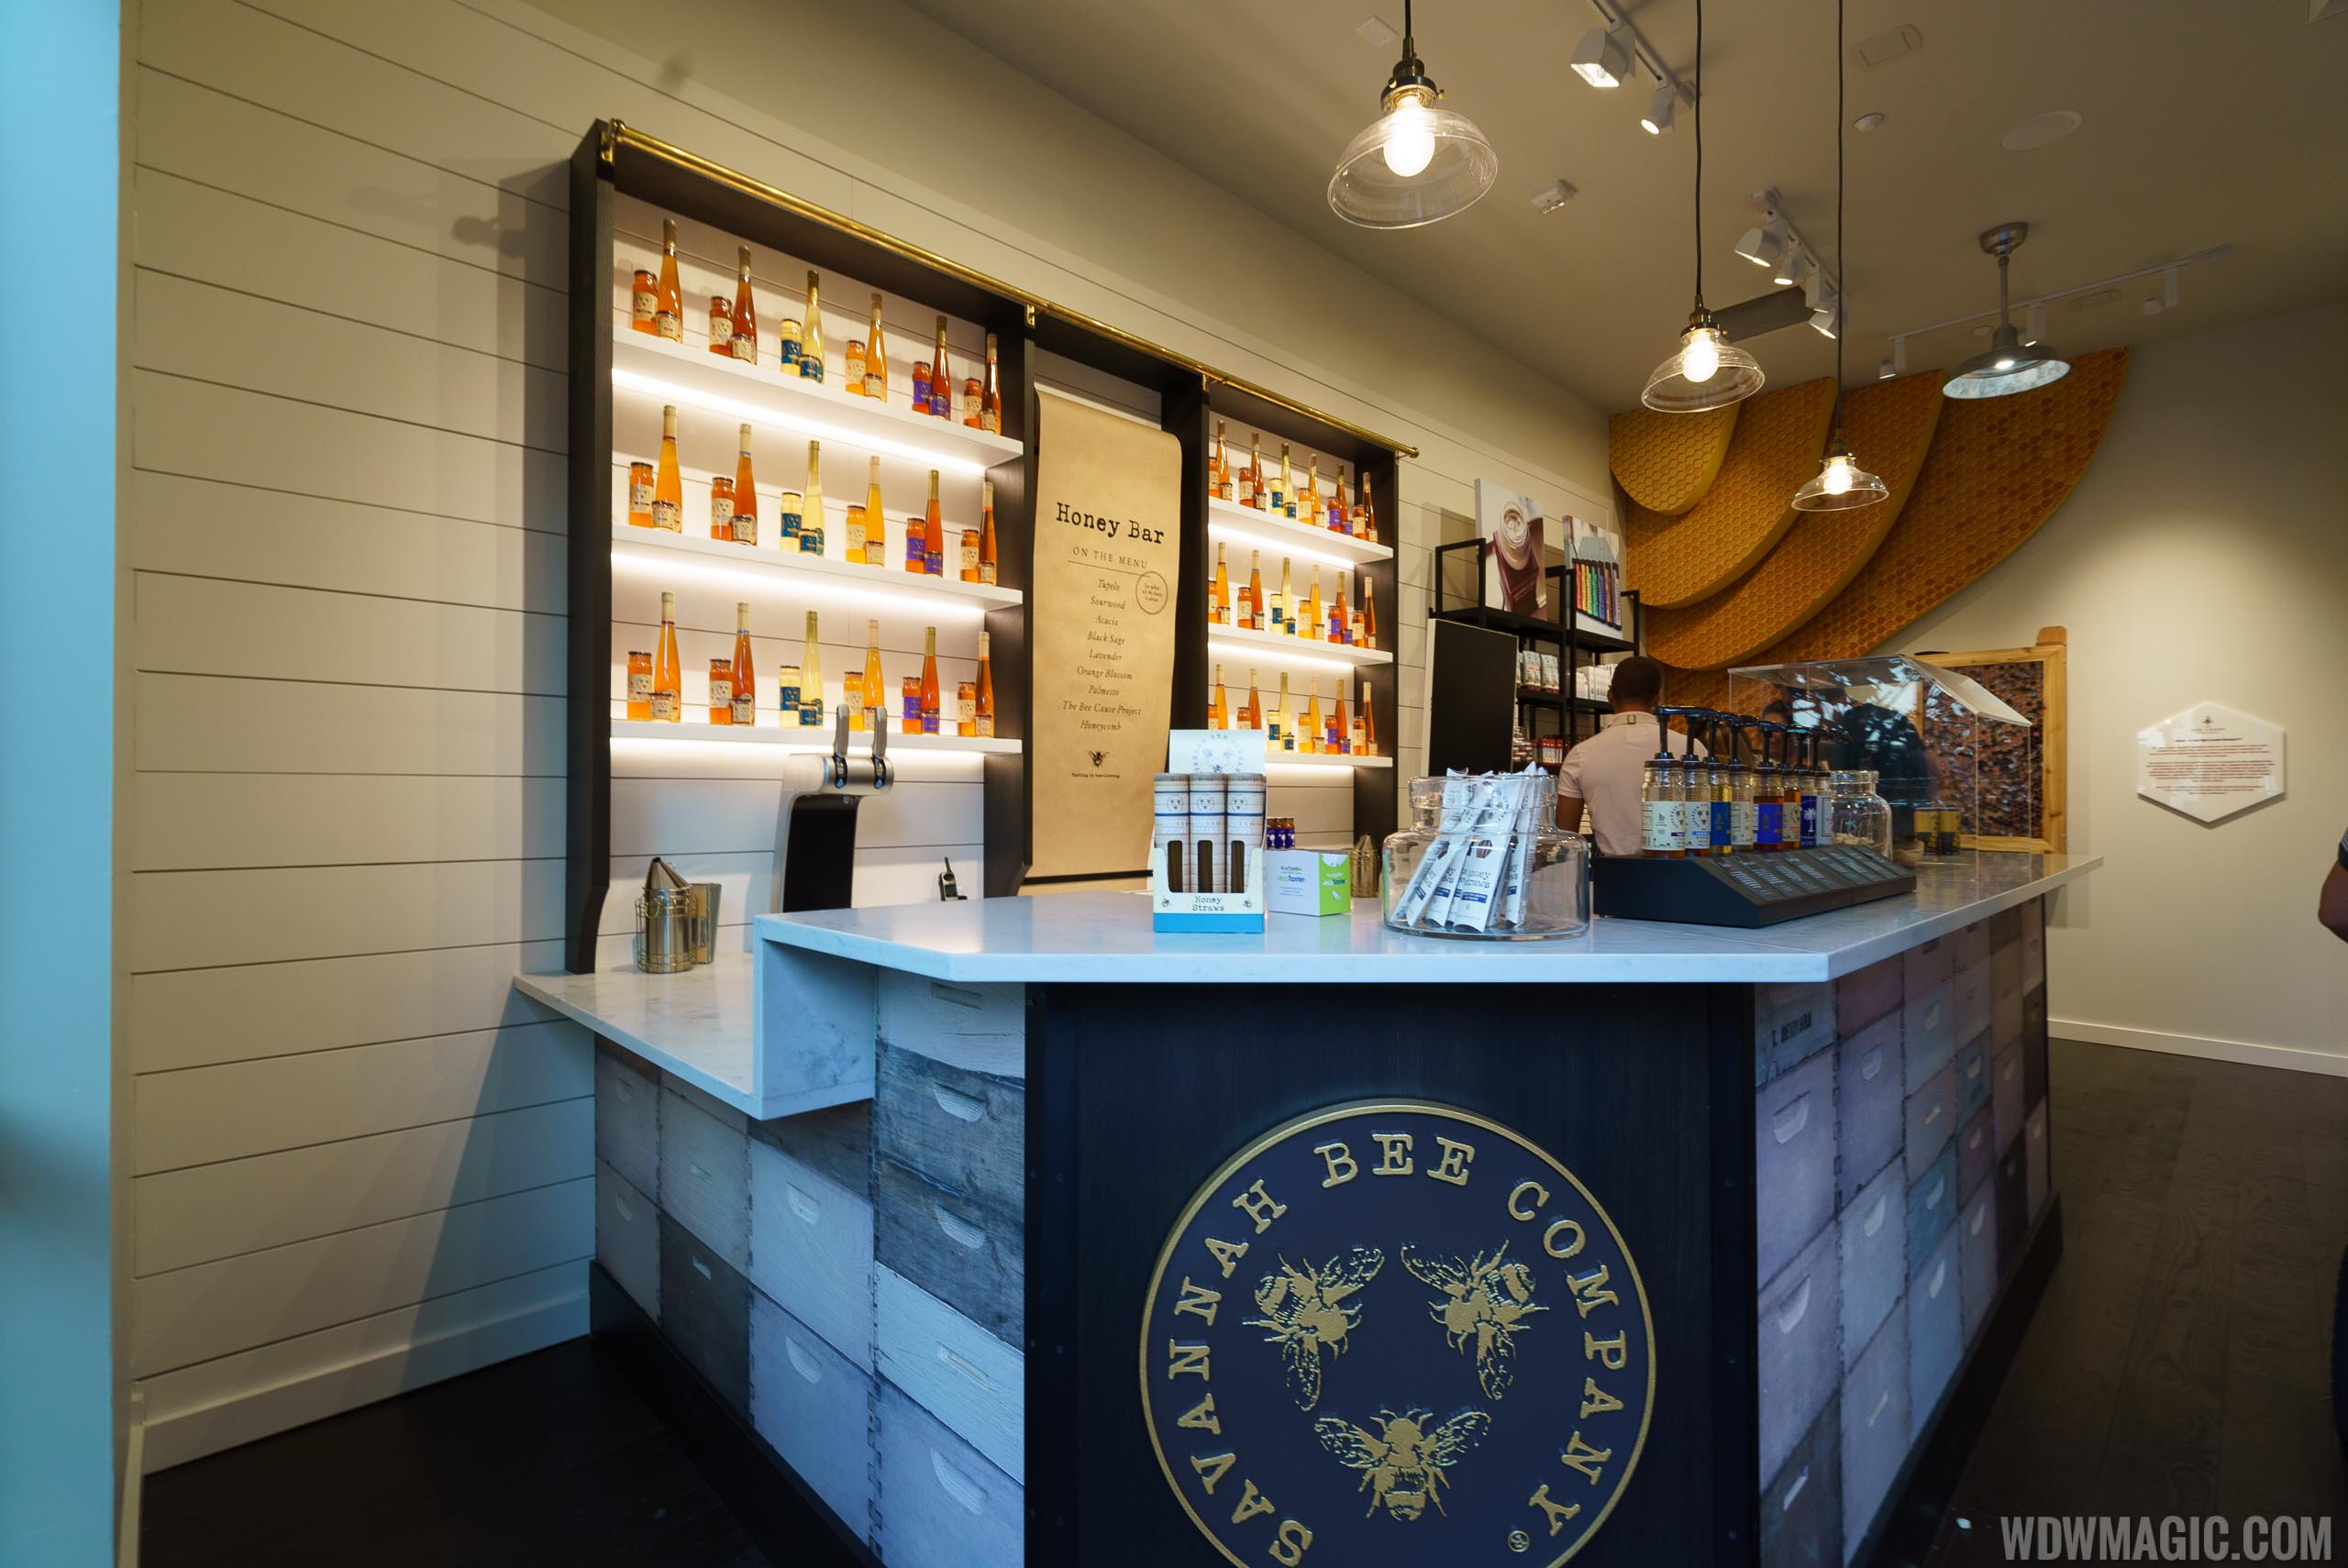 PHOTOS - Savannah Bee Company opens new store in The Landing at Disney ...